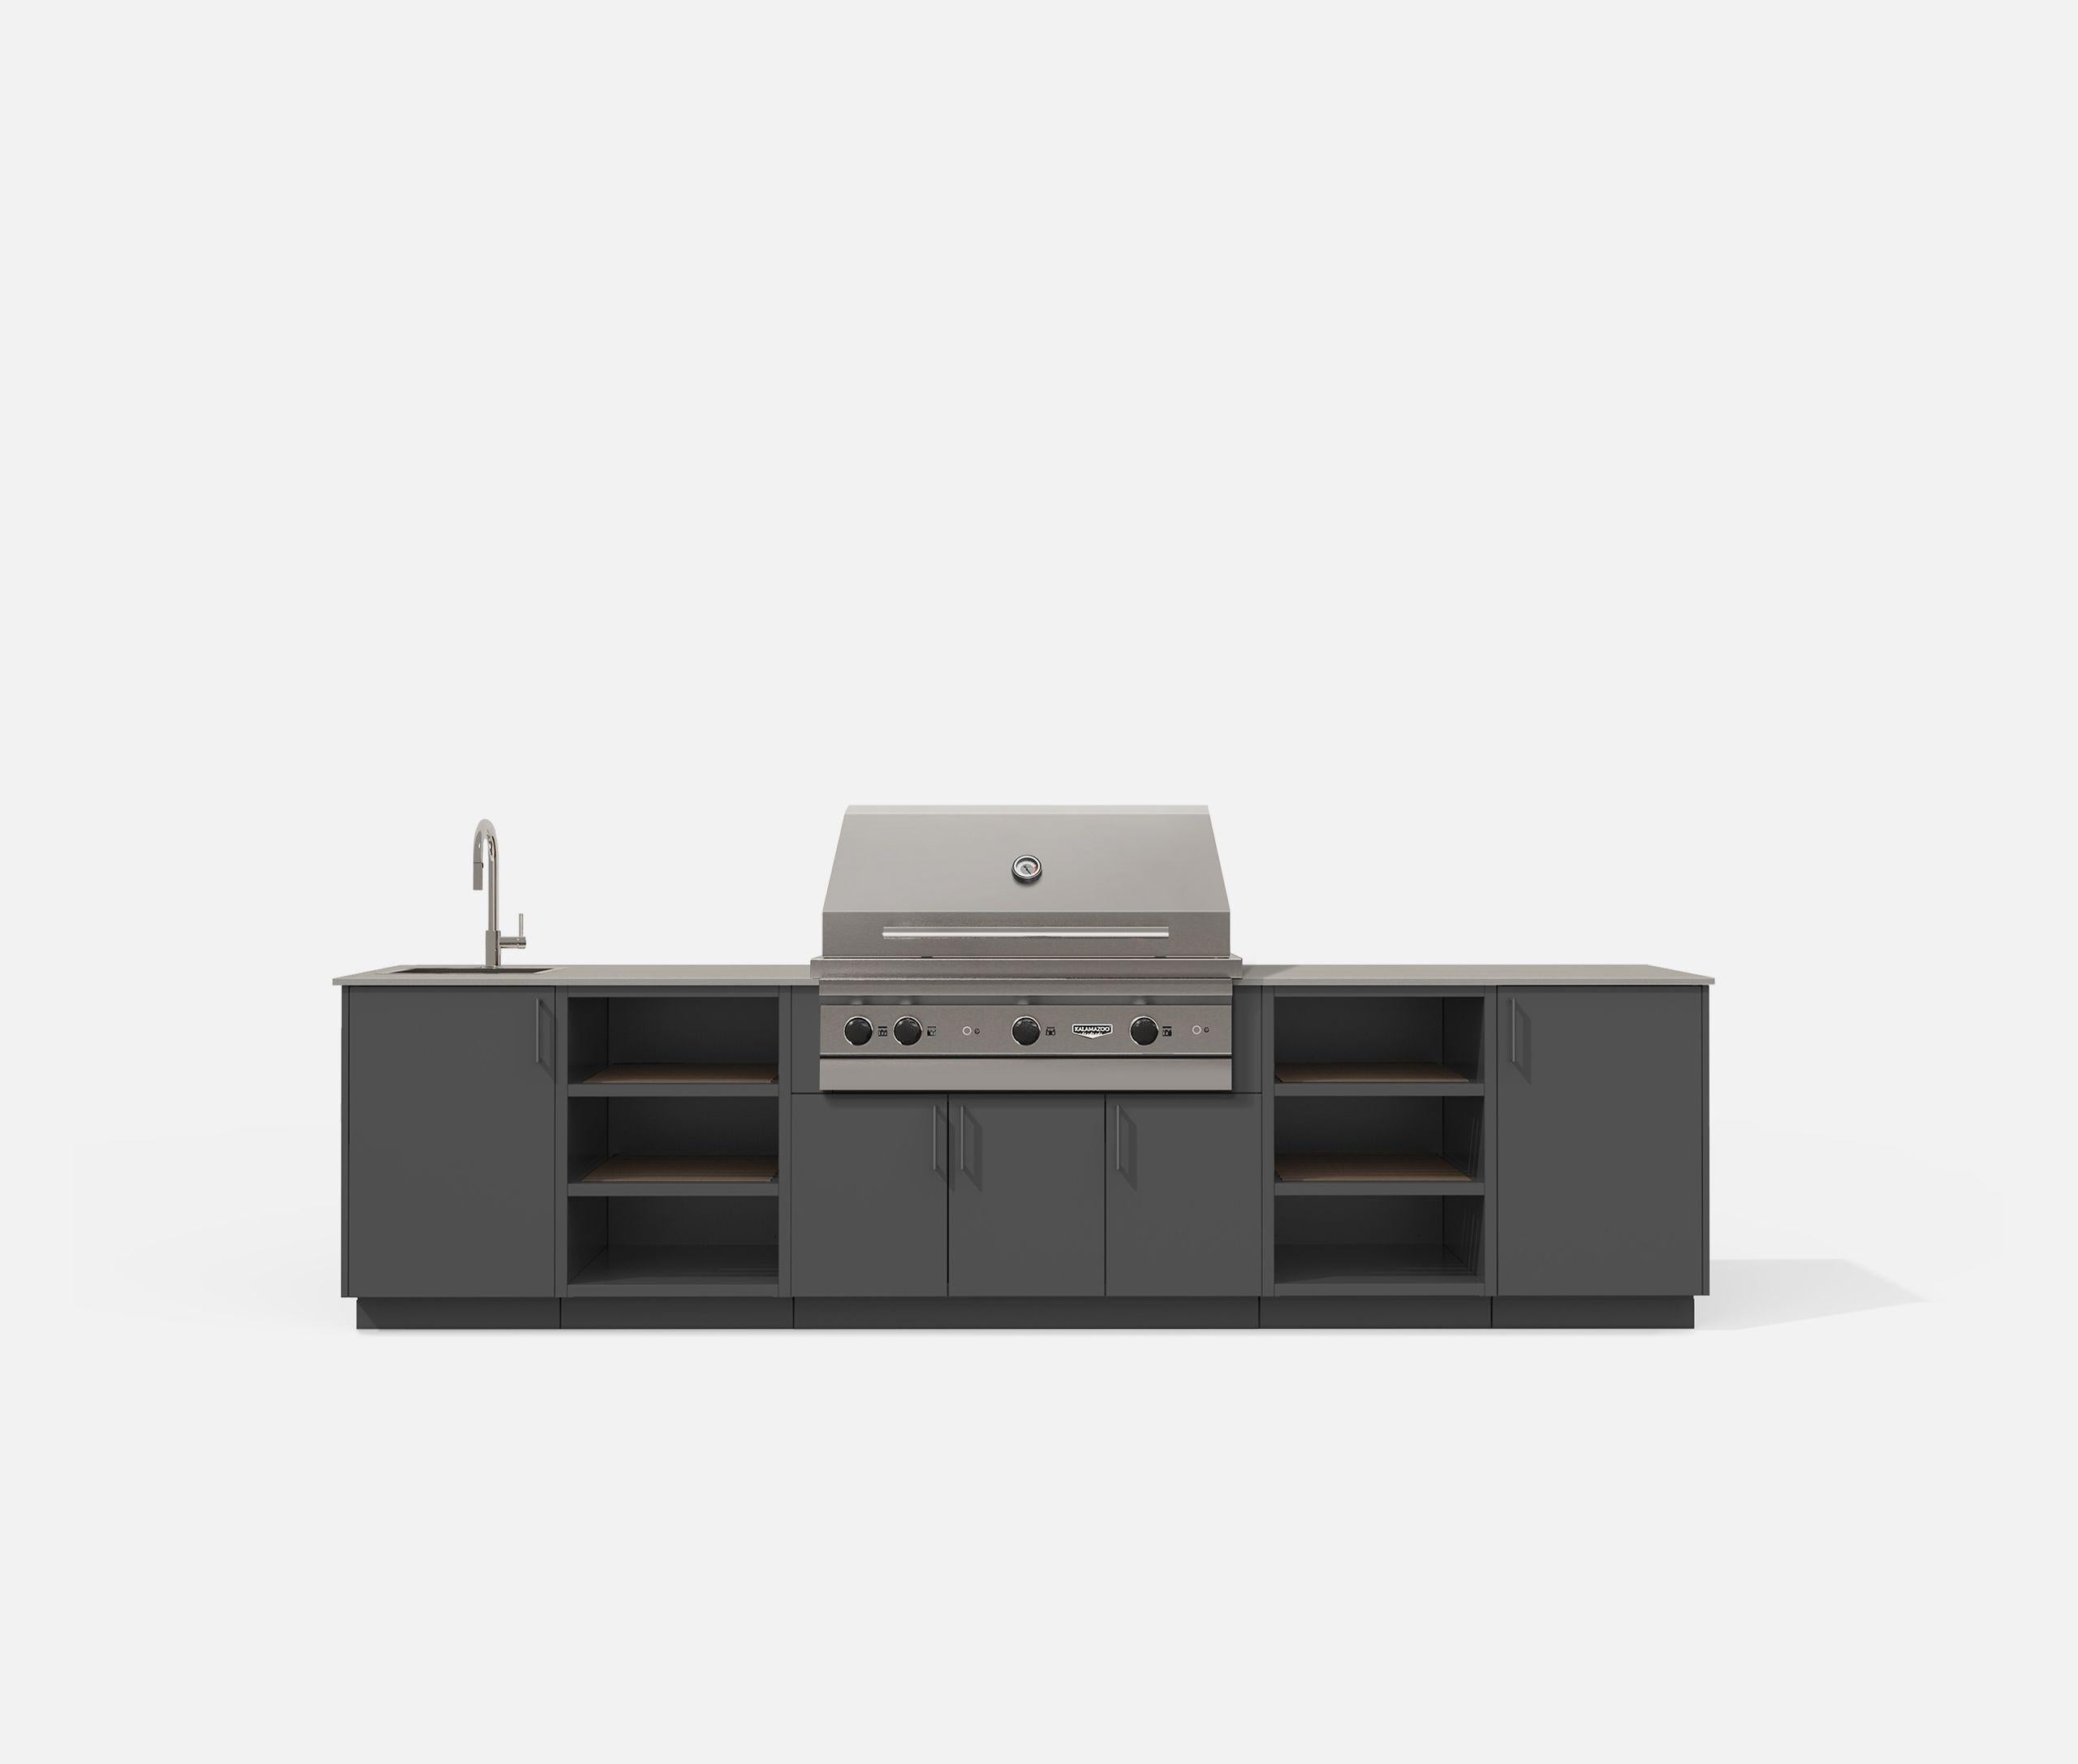 Urban Bonfire CTWILIGHT42ANTHRACITE Twilight 42 Outdoor Kitchen (Anthracite) GRILL SOLD SEPARATELY